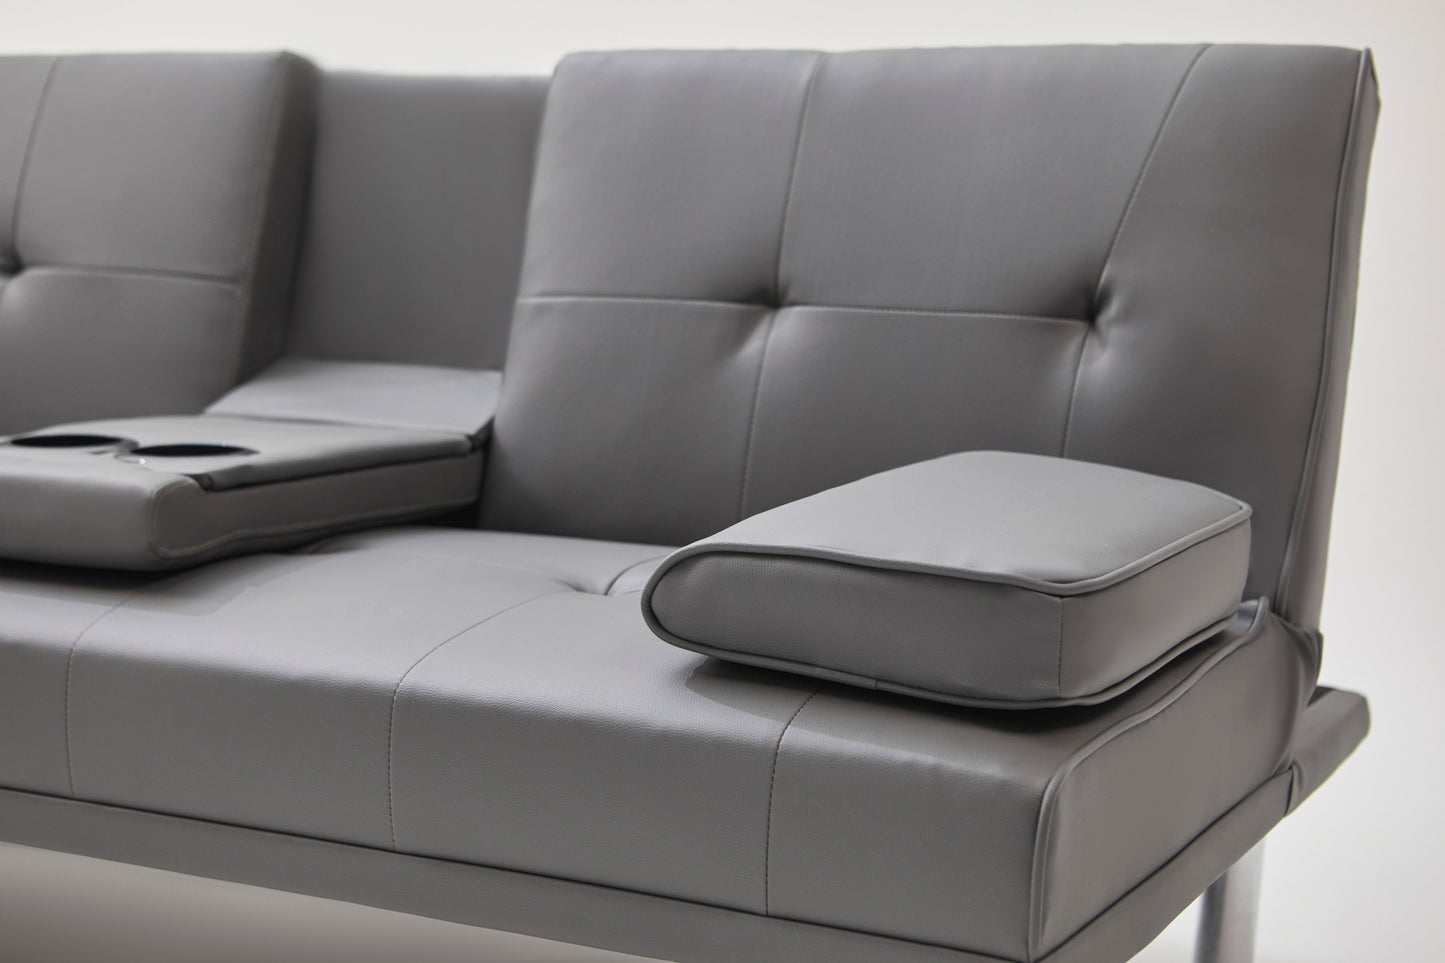 [New+Video] Grey Leather Multifunctional Double Folding Sofa Bed for Office with Coffee Table